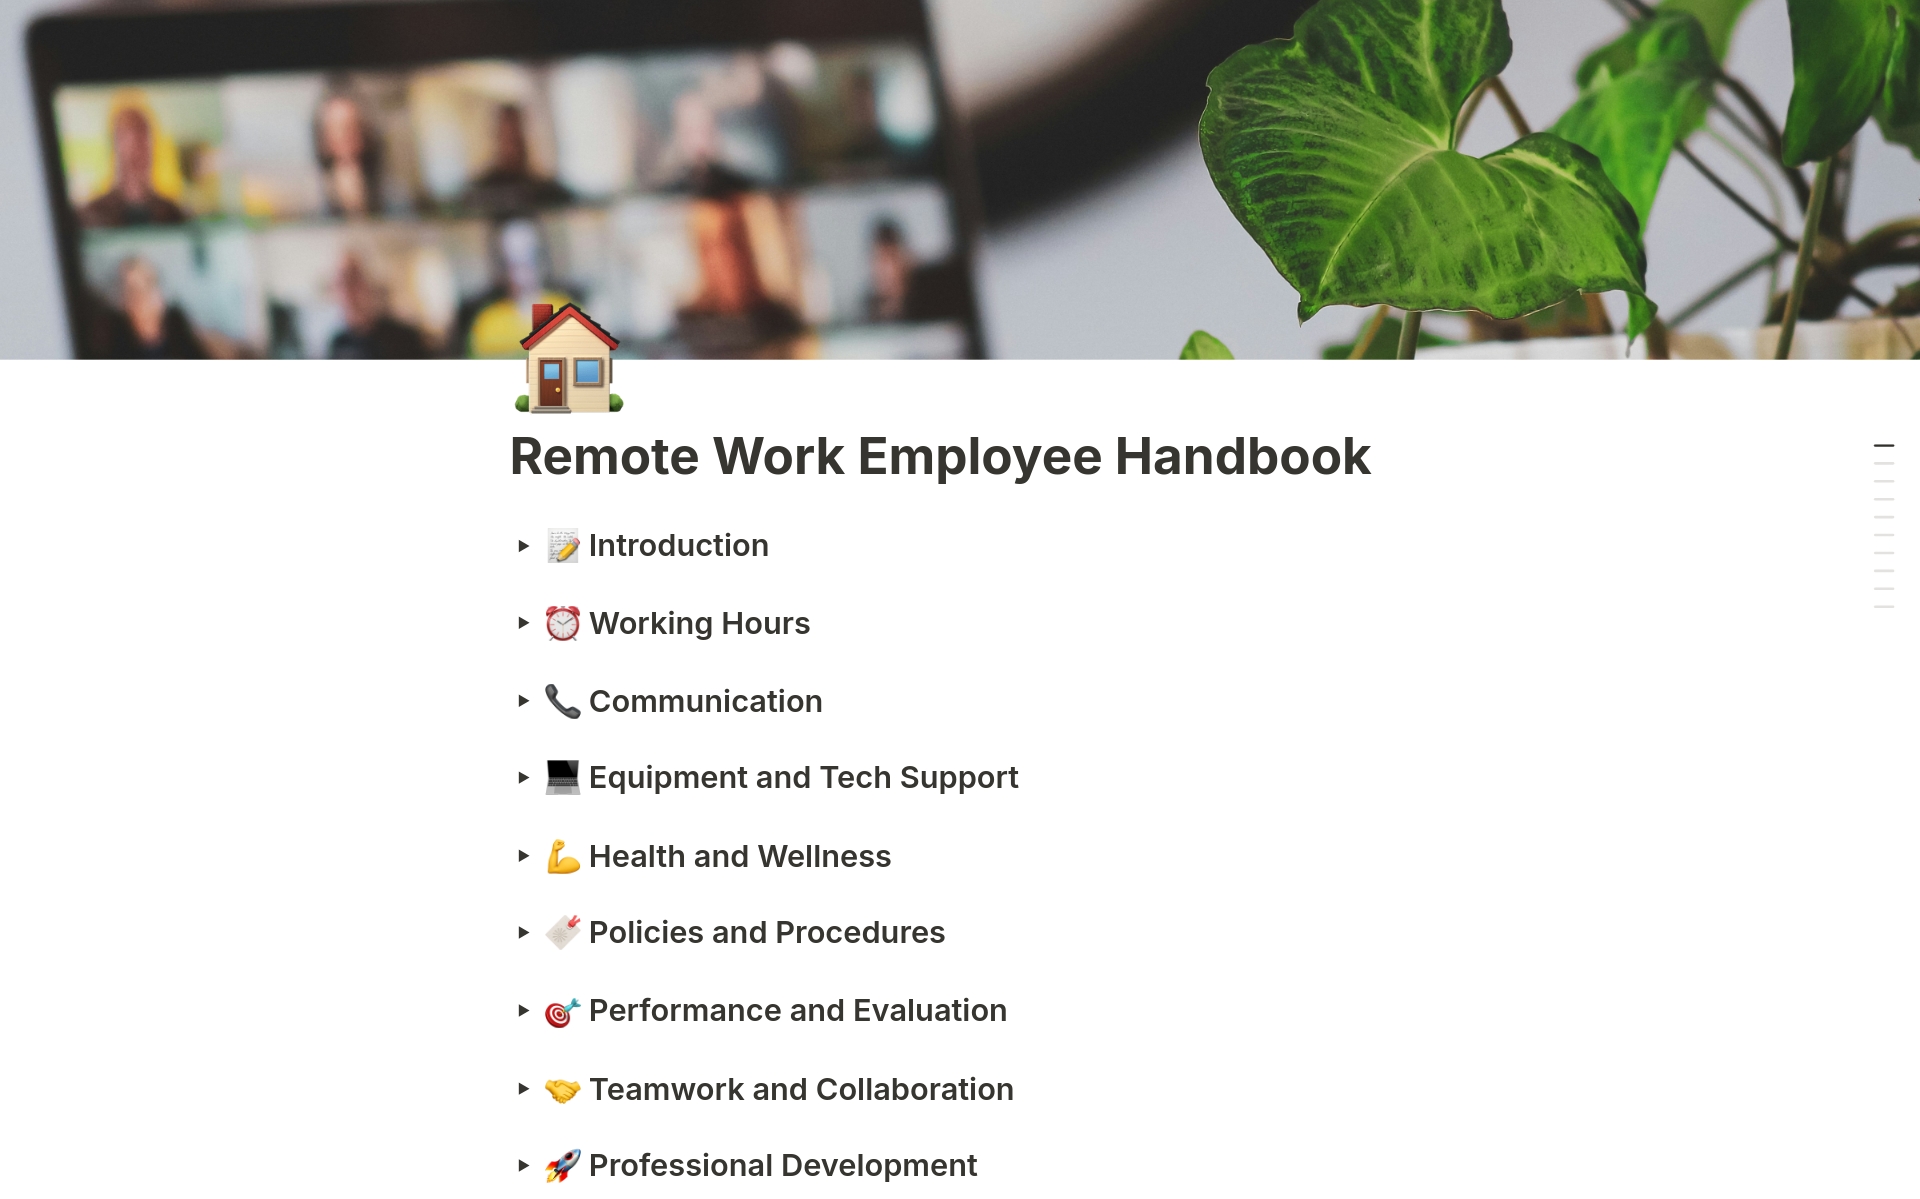 Guide for remote employees, detailing virtual work policies, communication strategies, and productivity tips.